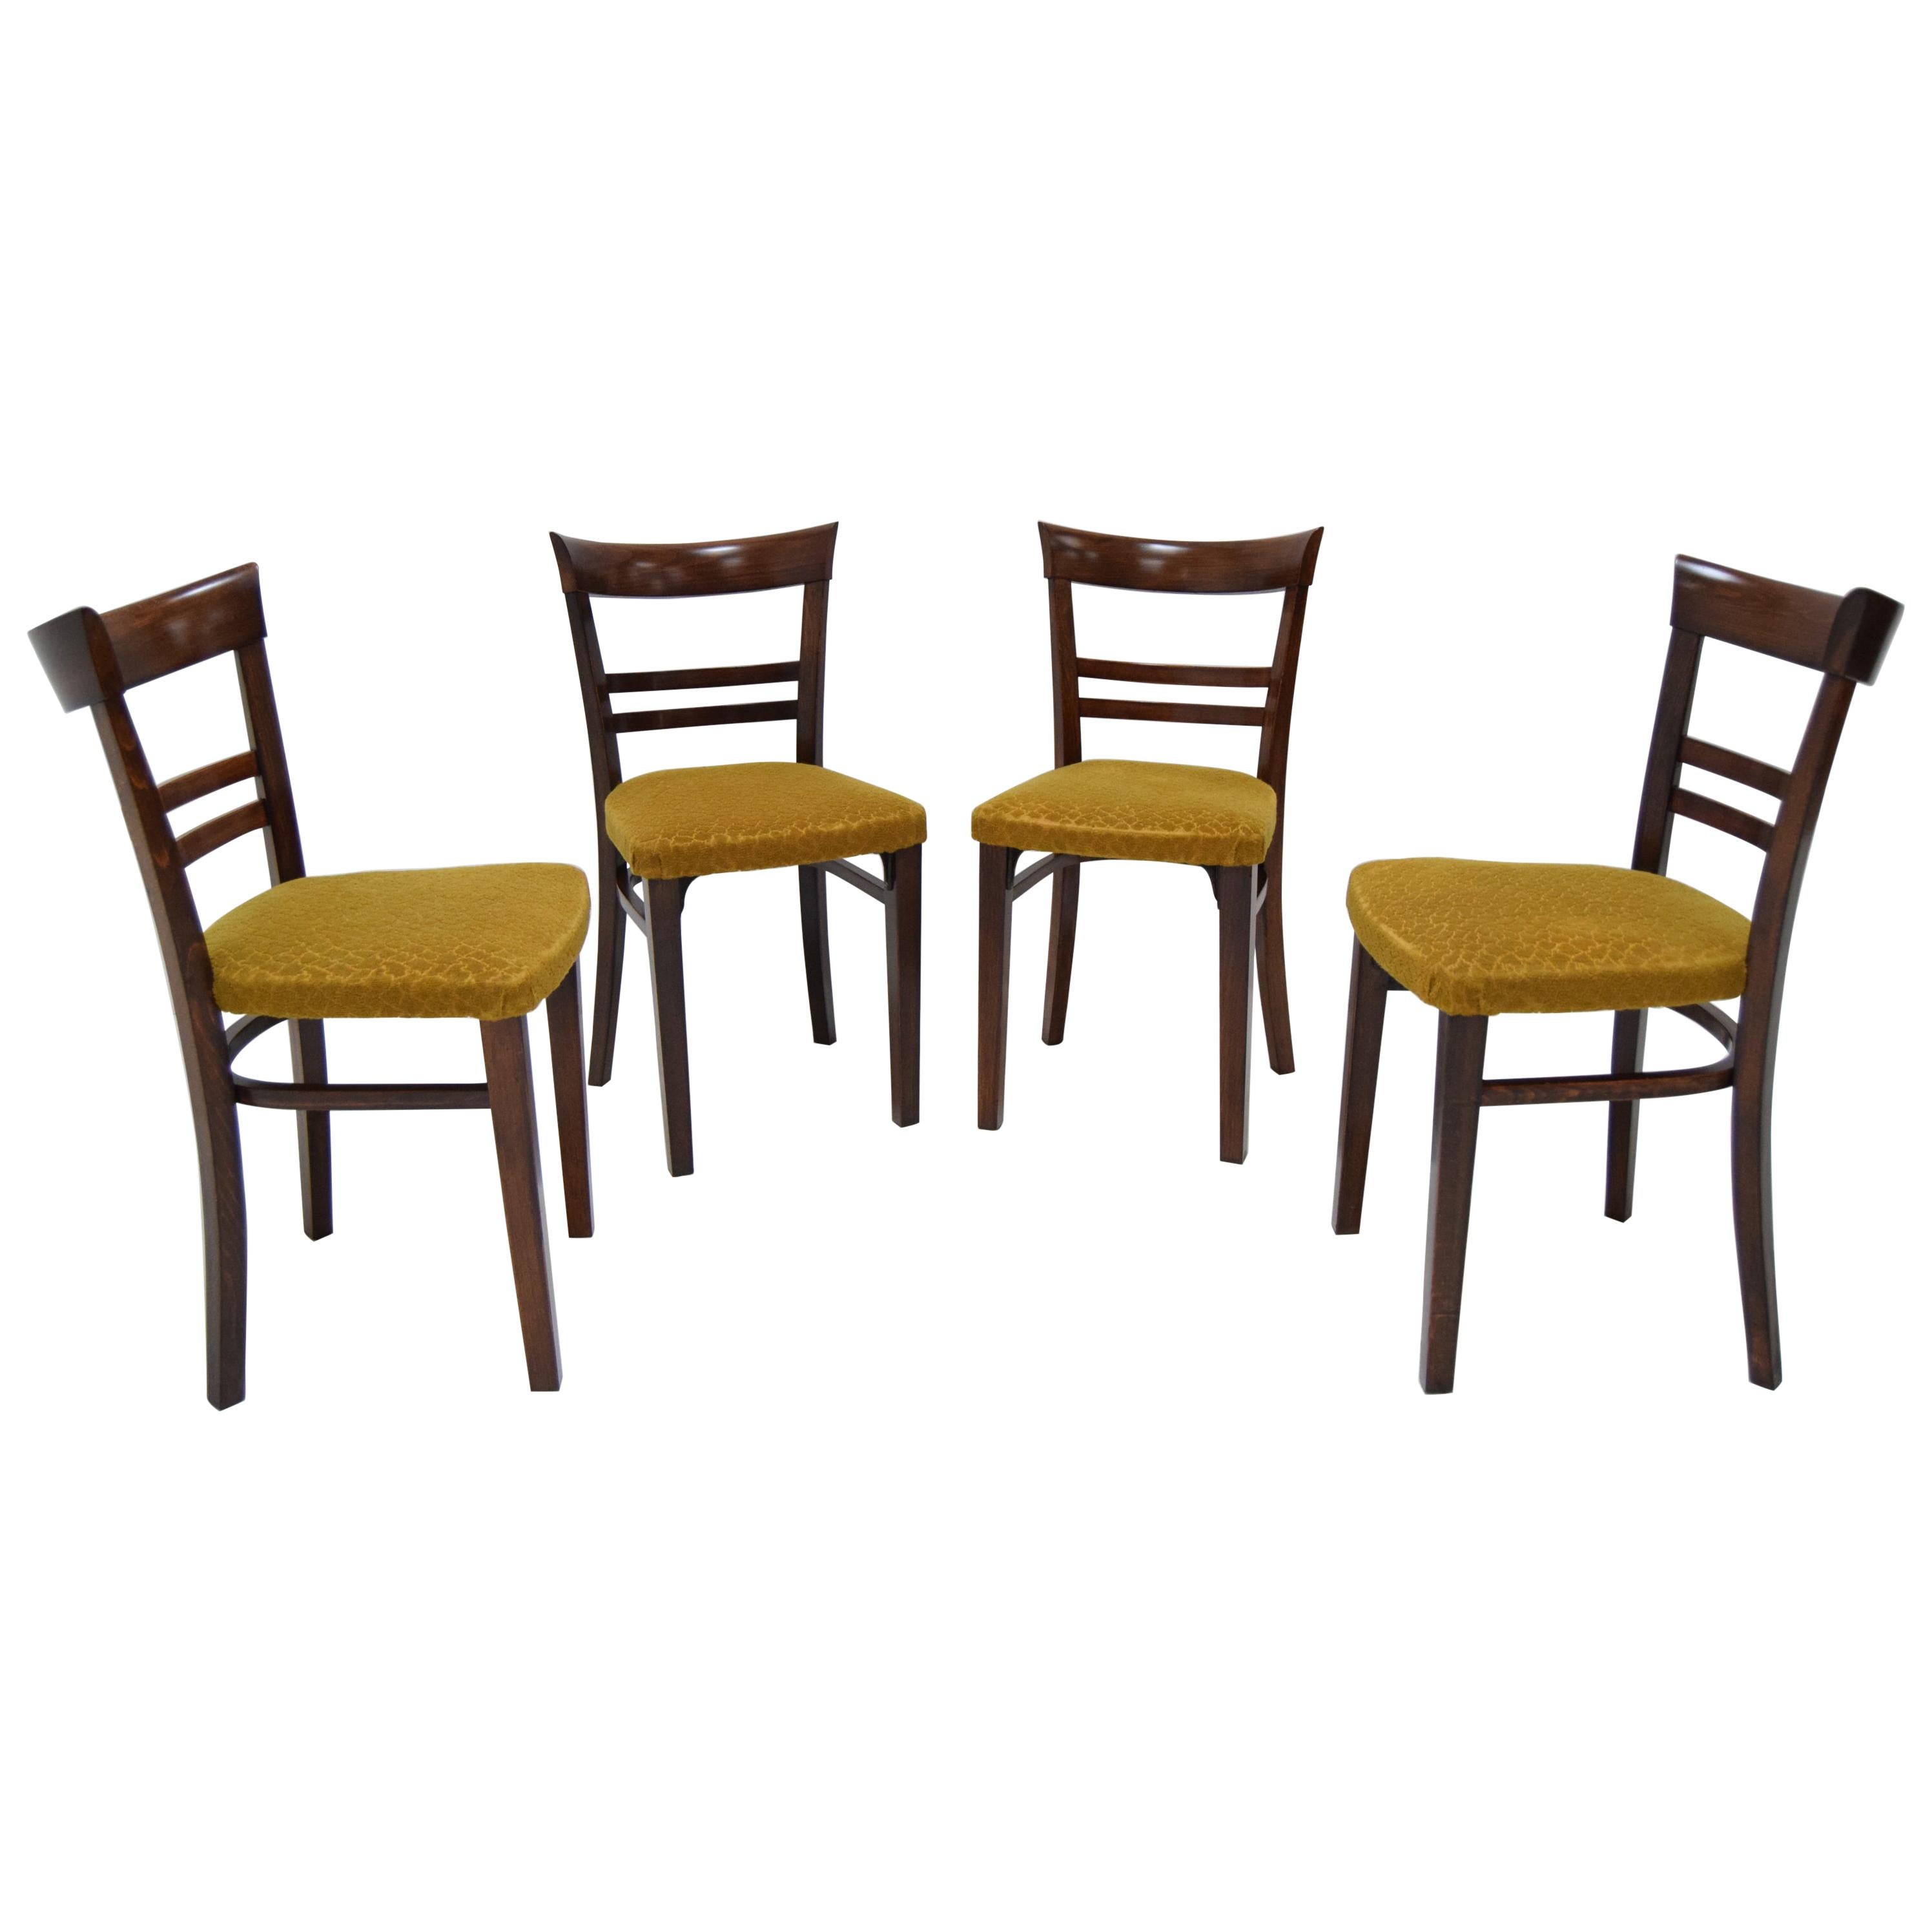 Set of Four Art Deco Dining Chairs by Fischel, 1930s For Sale